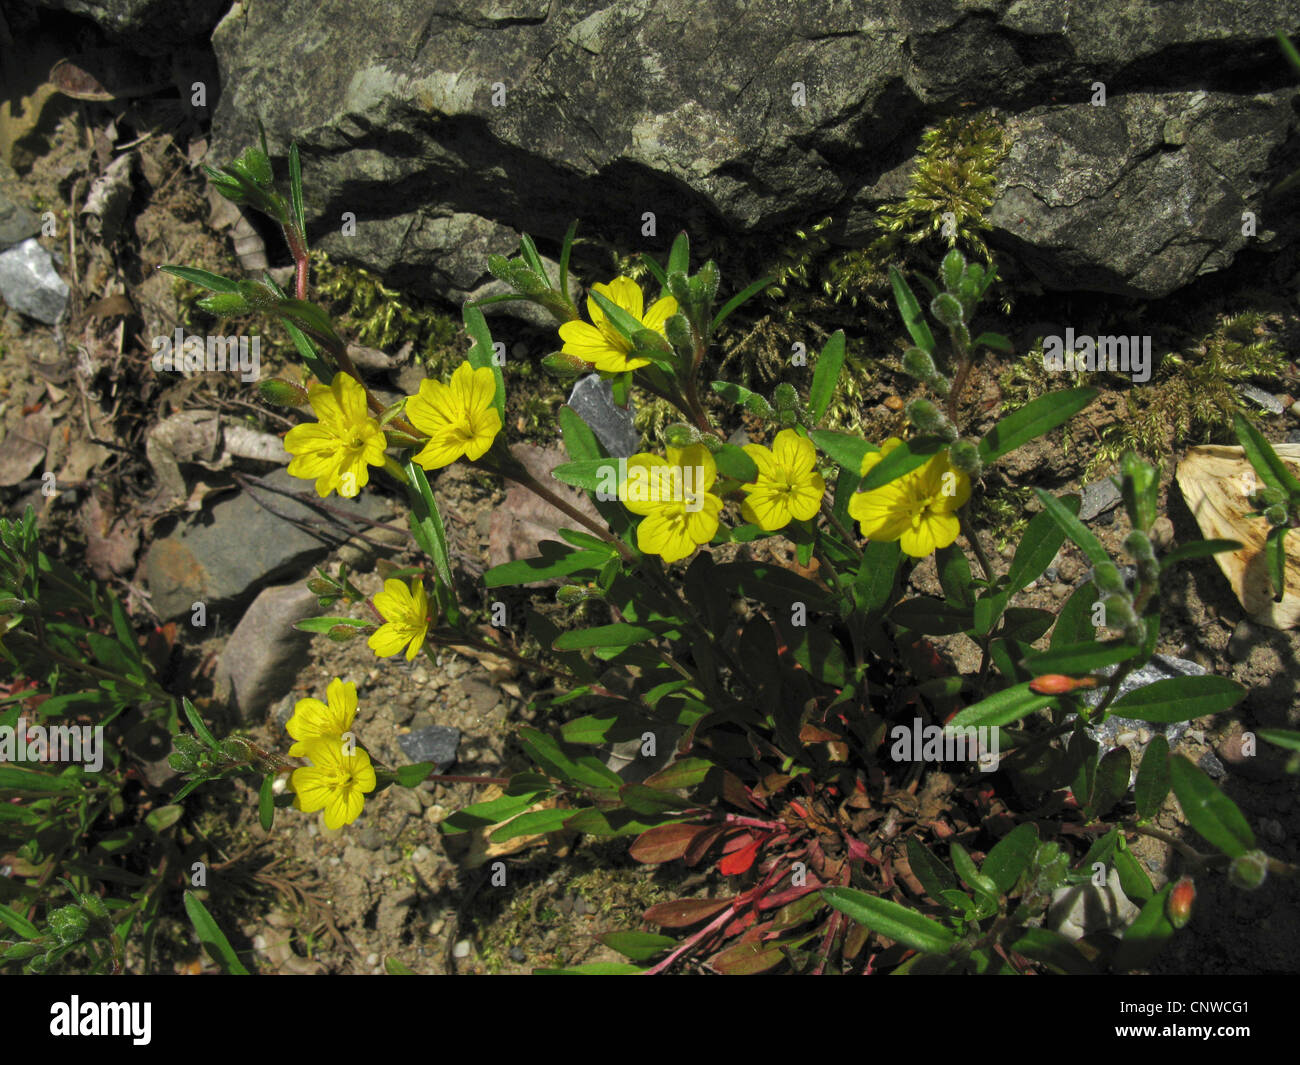 small sundrops (Oenothera perennis), blooming Stock Photo